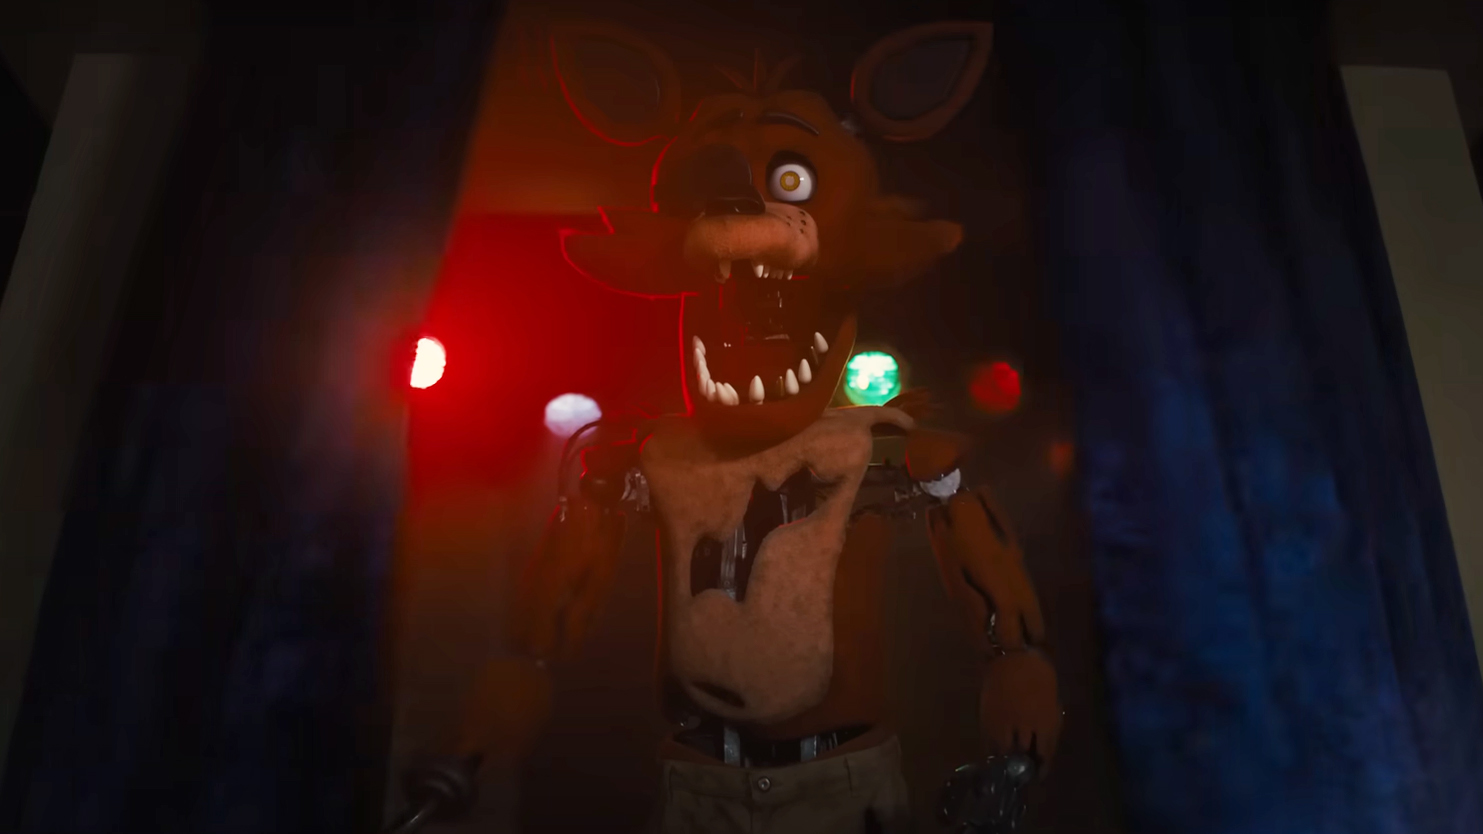 New 'Five Nights at Freddy's' Trailer Brings the Animatronics to Life